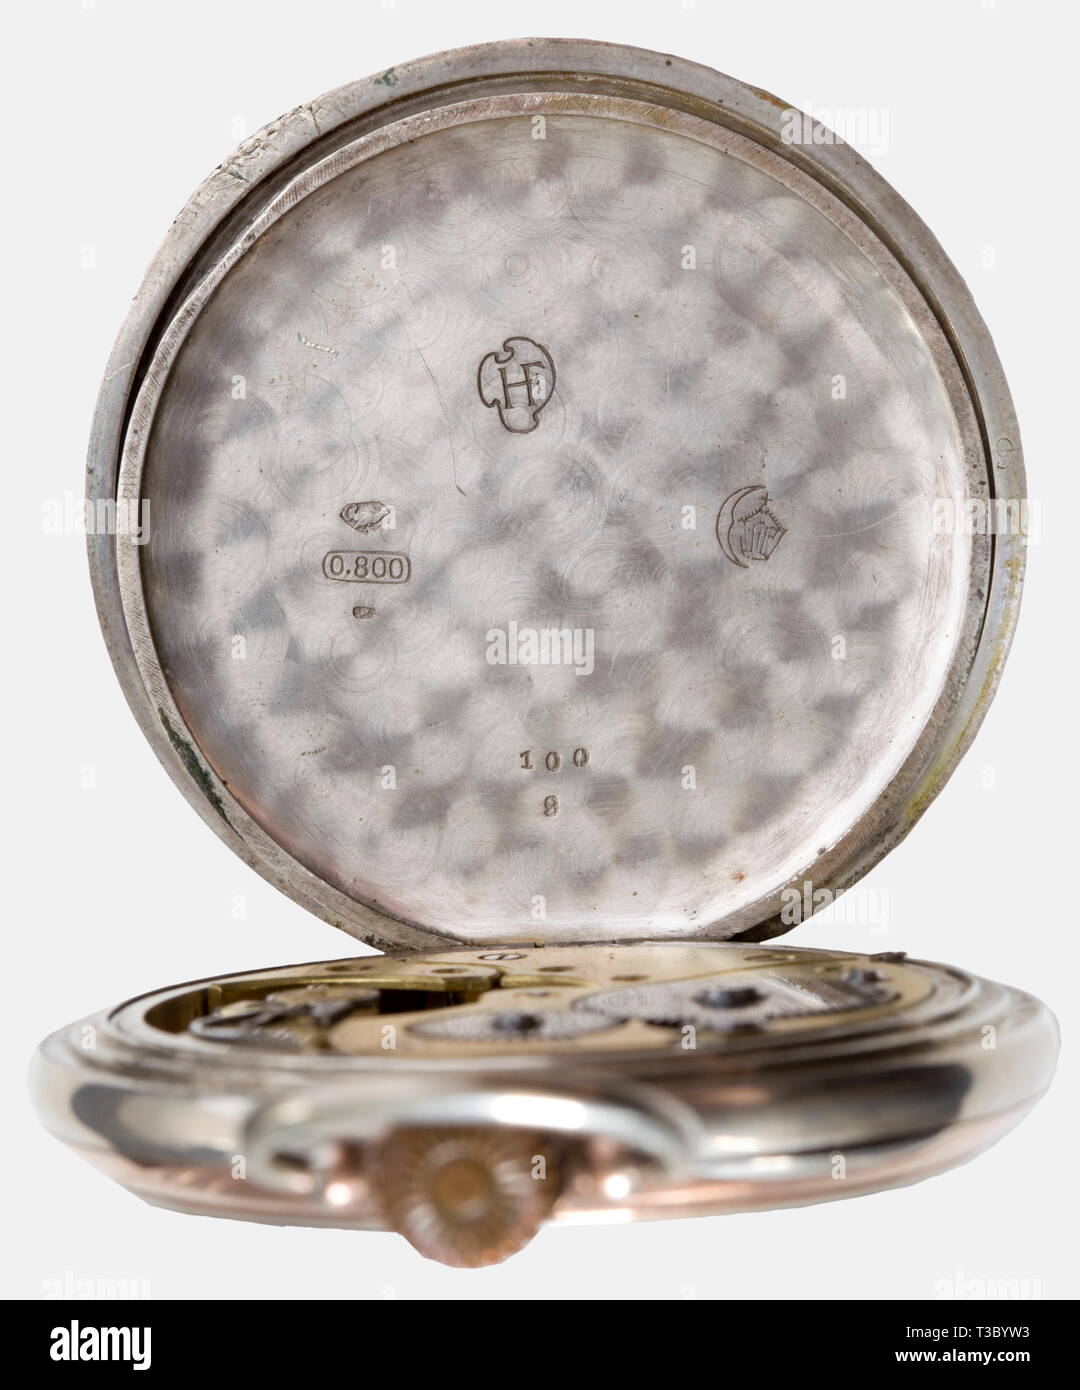 Kaiser Wilhelm II - Johann Adam, a presentation pocket watch Silver case, partially gilded. The lid bears the Imperial cipher 'W'. The dust cap displays a wreathed and crowned of Wilhelm II and the dedication inscription, 'Für 25 Jährige treue Dienste in der Königlichen Pulverfabrik bei Hanau 1915 Dem Betriebsleiter Johann Adam I'. (To the Managing Director Johann Adam I For 25 years of Loyal Service at the Royal Powder Factory at Hanau 1915). Enamelled dial. Simple blued lancet hands. Separate second dial. Manufacturer's mark, 'HF'. Movement not, Additional-Rights-Clearance-Info-Not-Available Stock Photo